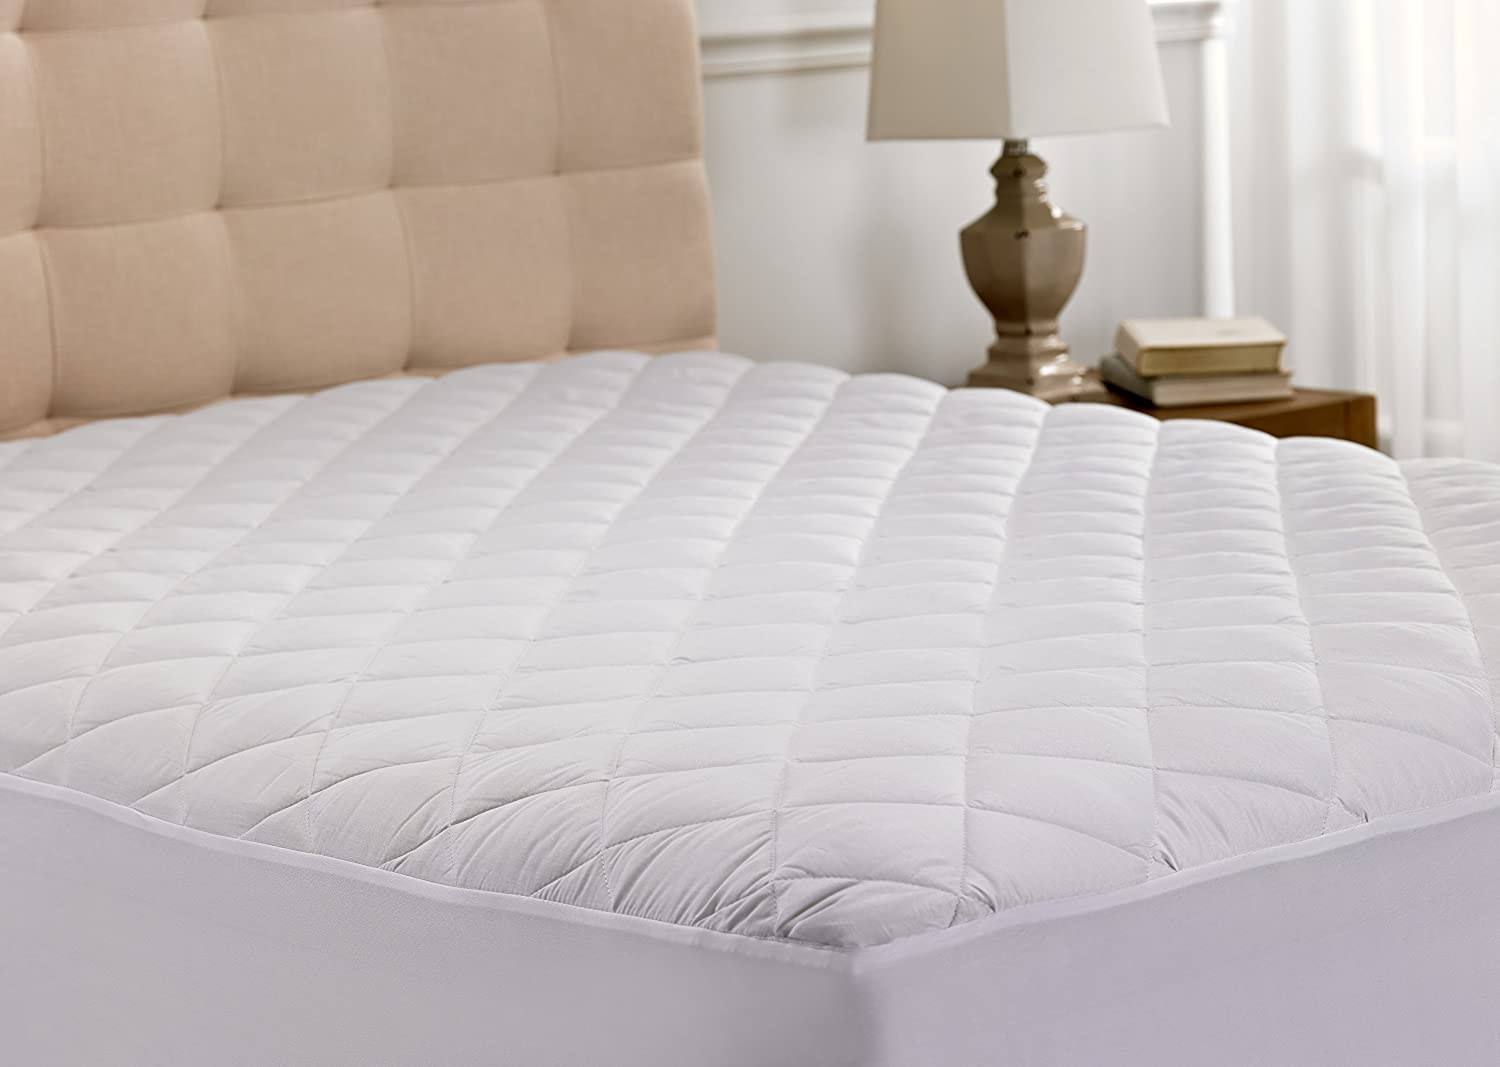 Hypoallergenic Quilted Stretch-to-Fit Mattress Pad by Hanna Kay, 10 Year Warrant